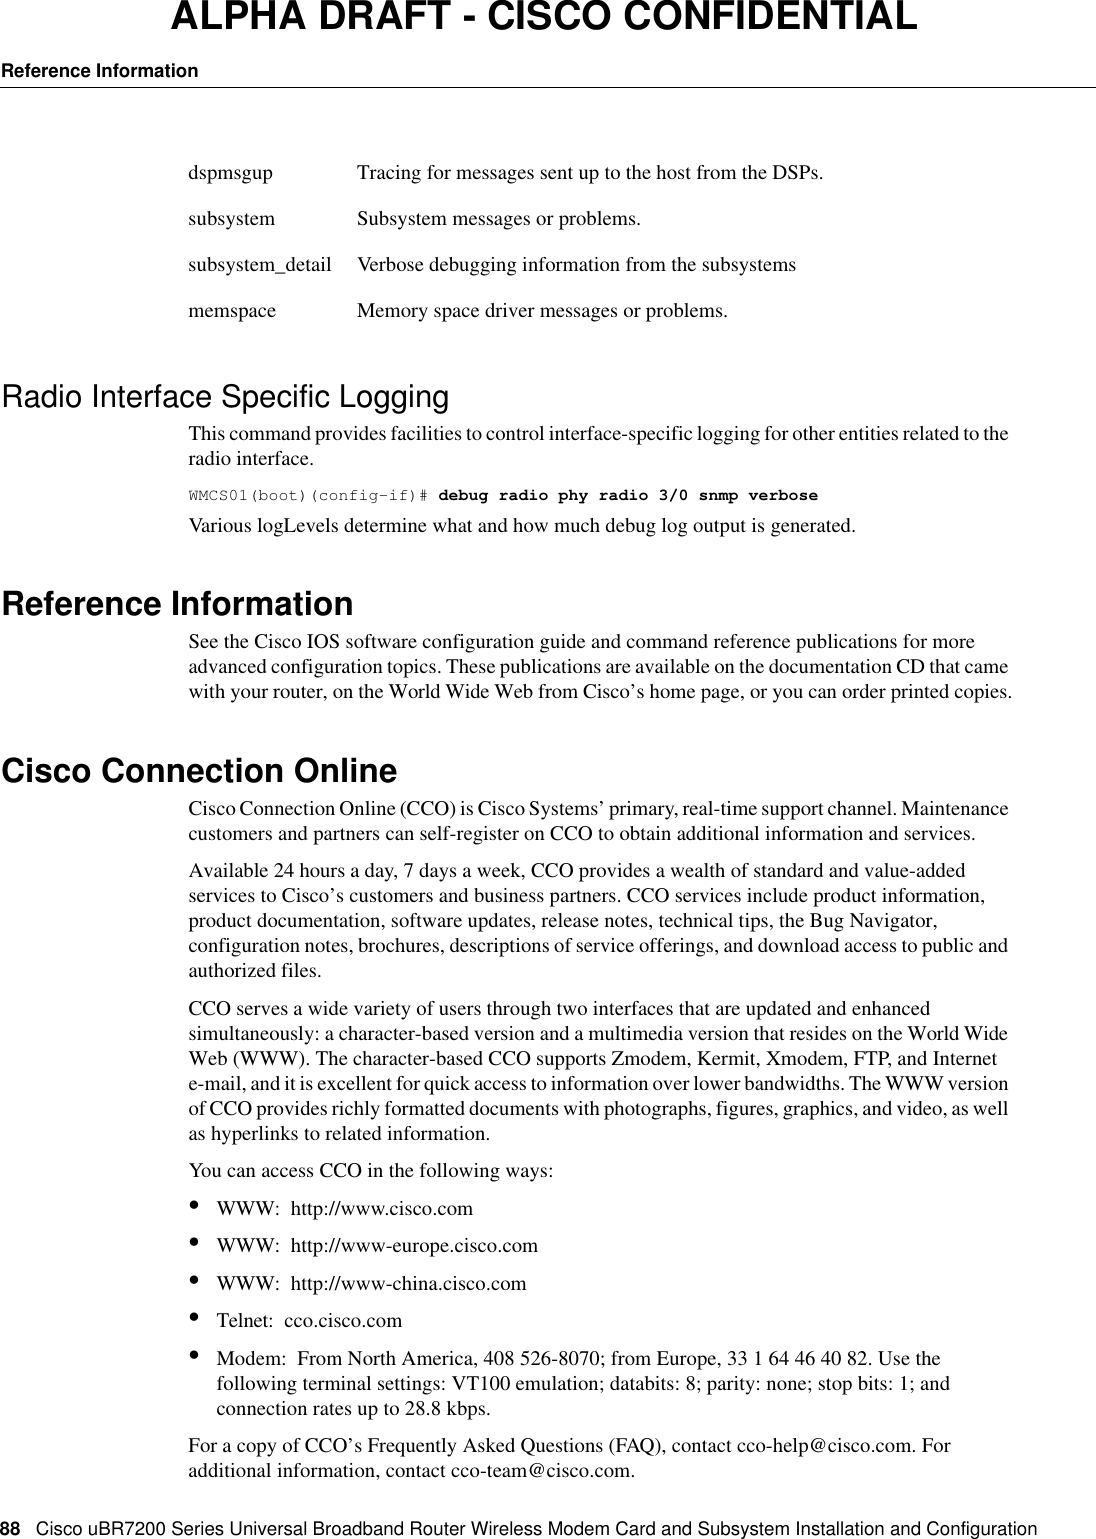 88CiscouBR7200 Series Universal Broadband Router Wireless Modem Card and Subsystem Installation and ConfigurationReference InformationALPHA DRAFT - CISCO CONFIDENTIALRadio Interface Specific LoggingThis command provides facilities to control interface-specific logging for other entities related to the radio interface.WMCS01(boot)(config-if)# debug radio phy radio 3/0 snmp verboseVarious logLevels determine what and how much debug log output is generated.Reference InformationSee the Cisco IOS software configuration guide and command reference publications for more advanced configuration topics. These publications are available on the documentation CD that came with your router, on the World Wide Web from Cisco’s home page, or you can order printed copies.Cisco Connection OnlineCisco Connection Online (CCO) is Cisco Systems’ primary, real-time support channel. Maintenance customers and partners can self-register on CCO to obtain additional information and services.Available 24 hours a day, 7 days a week, CCO provides a wealth of standard and value-added services to Cisco’s customers and business partners. CCO services include product information, product documentation, software updates, release notes, technical tips, the Bug Navigator, configuration notes, brochures, descriptions of service offerings, and download access to public and authorized files.CCO serves a wide variety of users through two interfaces that are updated and enhanced simultaneously: a character-based version and a multimedia version that resides on the World Wide Web (WWW). The character-based CCO supports Zmodem, Kermit, Xmodem, FTP, and Internet e-mail, and it is excellent for quick access to information over lower bandwidths. The WWW version of CCO provides richly formatted documents with photographs, figures, graphics, and video, as well as hyperlinks to related information.You can access CCO in the following ways:•WWW:http://www.cisco.com•WWW:http://www-europe.cisco.com•WWW:http://www-china.cisco.com•Telnet:cco.cisco.com•Modem:From North America, 408526-8070; from Europe, 33164464082. Use the following terminal settings: VT100 emulation; databits: 8; parity: none; stop bits: 1; and connection rates up to 28.8kbps.For a copy of CCO’s Frequently Asked Questions (FAQ), contact cco-help@cisco.com. For additional information, contact cco-team@cisco.com.dspmsgup Tracing for messages sent up to the host from the DSPs.subsystem Subsystem messages or problems.subsystem_detail Verbose debugging information from the subsystemsmemspace Memory space driver messages or problems.